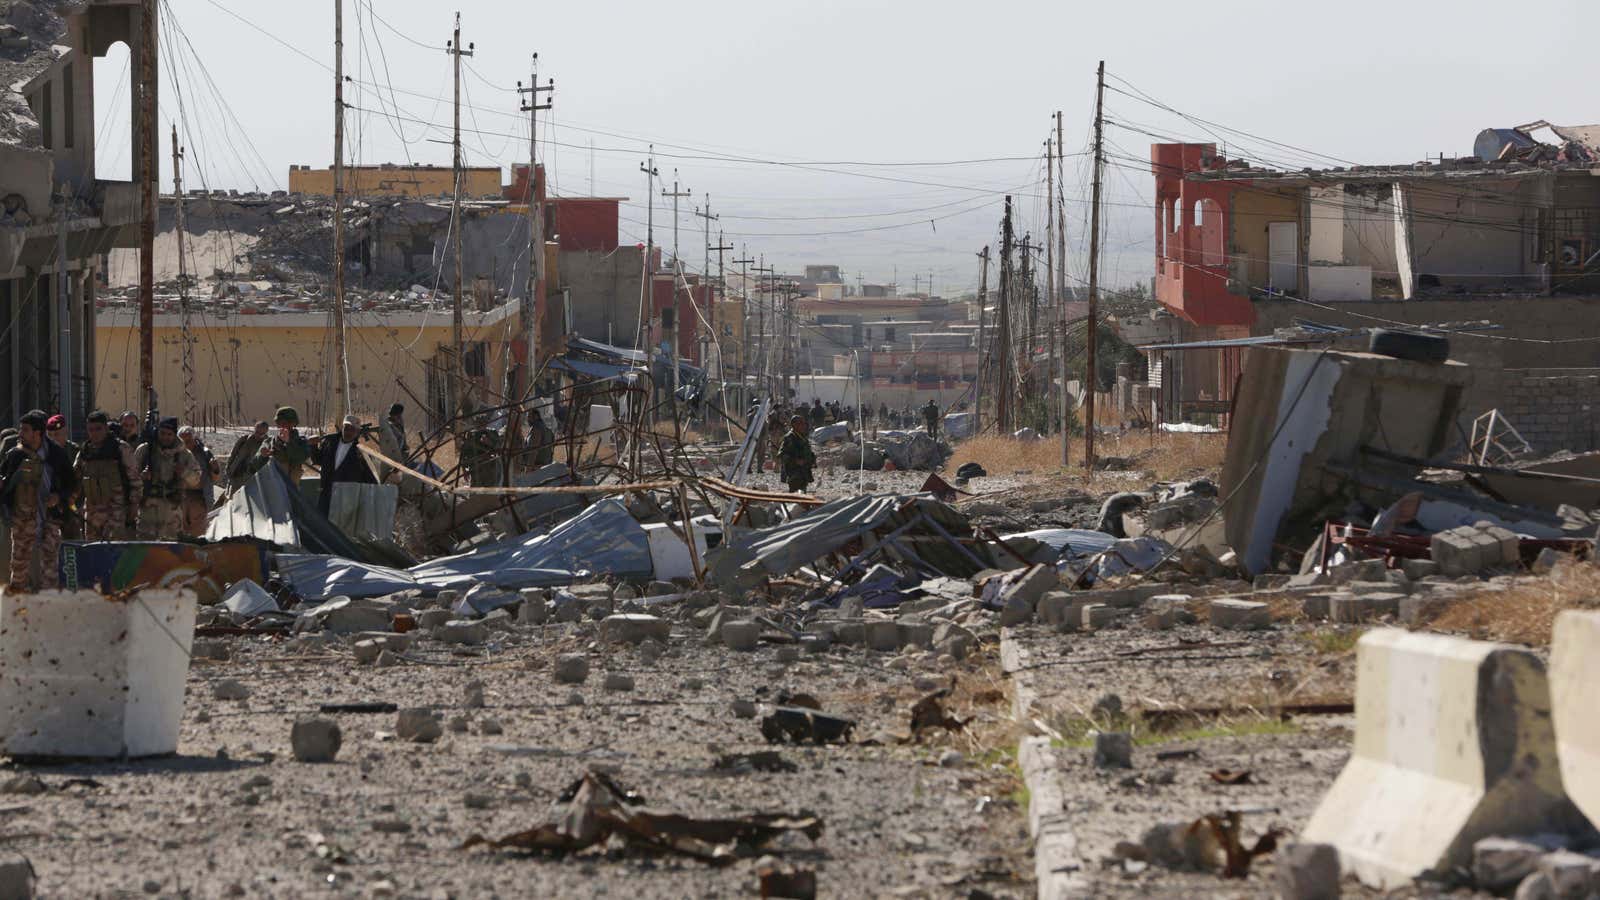 The town of Sinjar after being retaken by Kurdish forces.